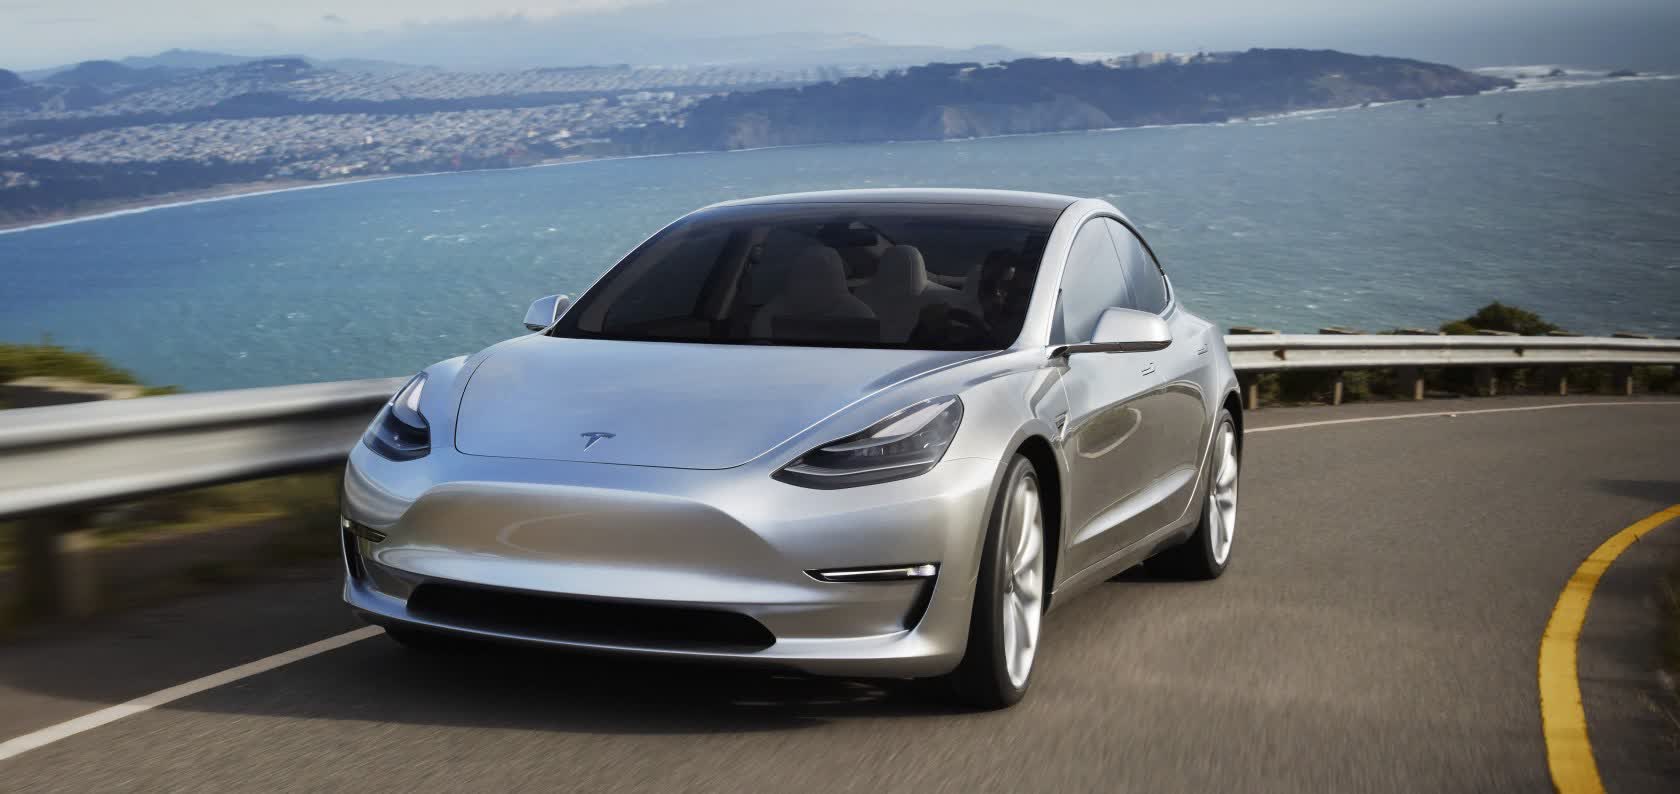 Tesla refreshes the Model 3 with improved range, a heated steering wheel, and more